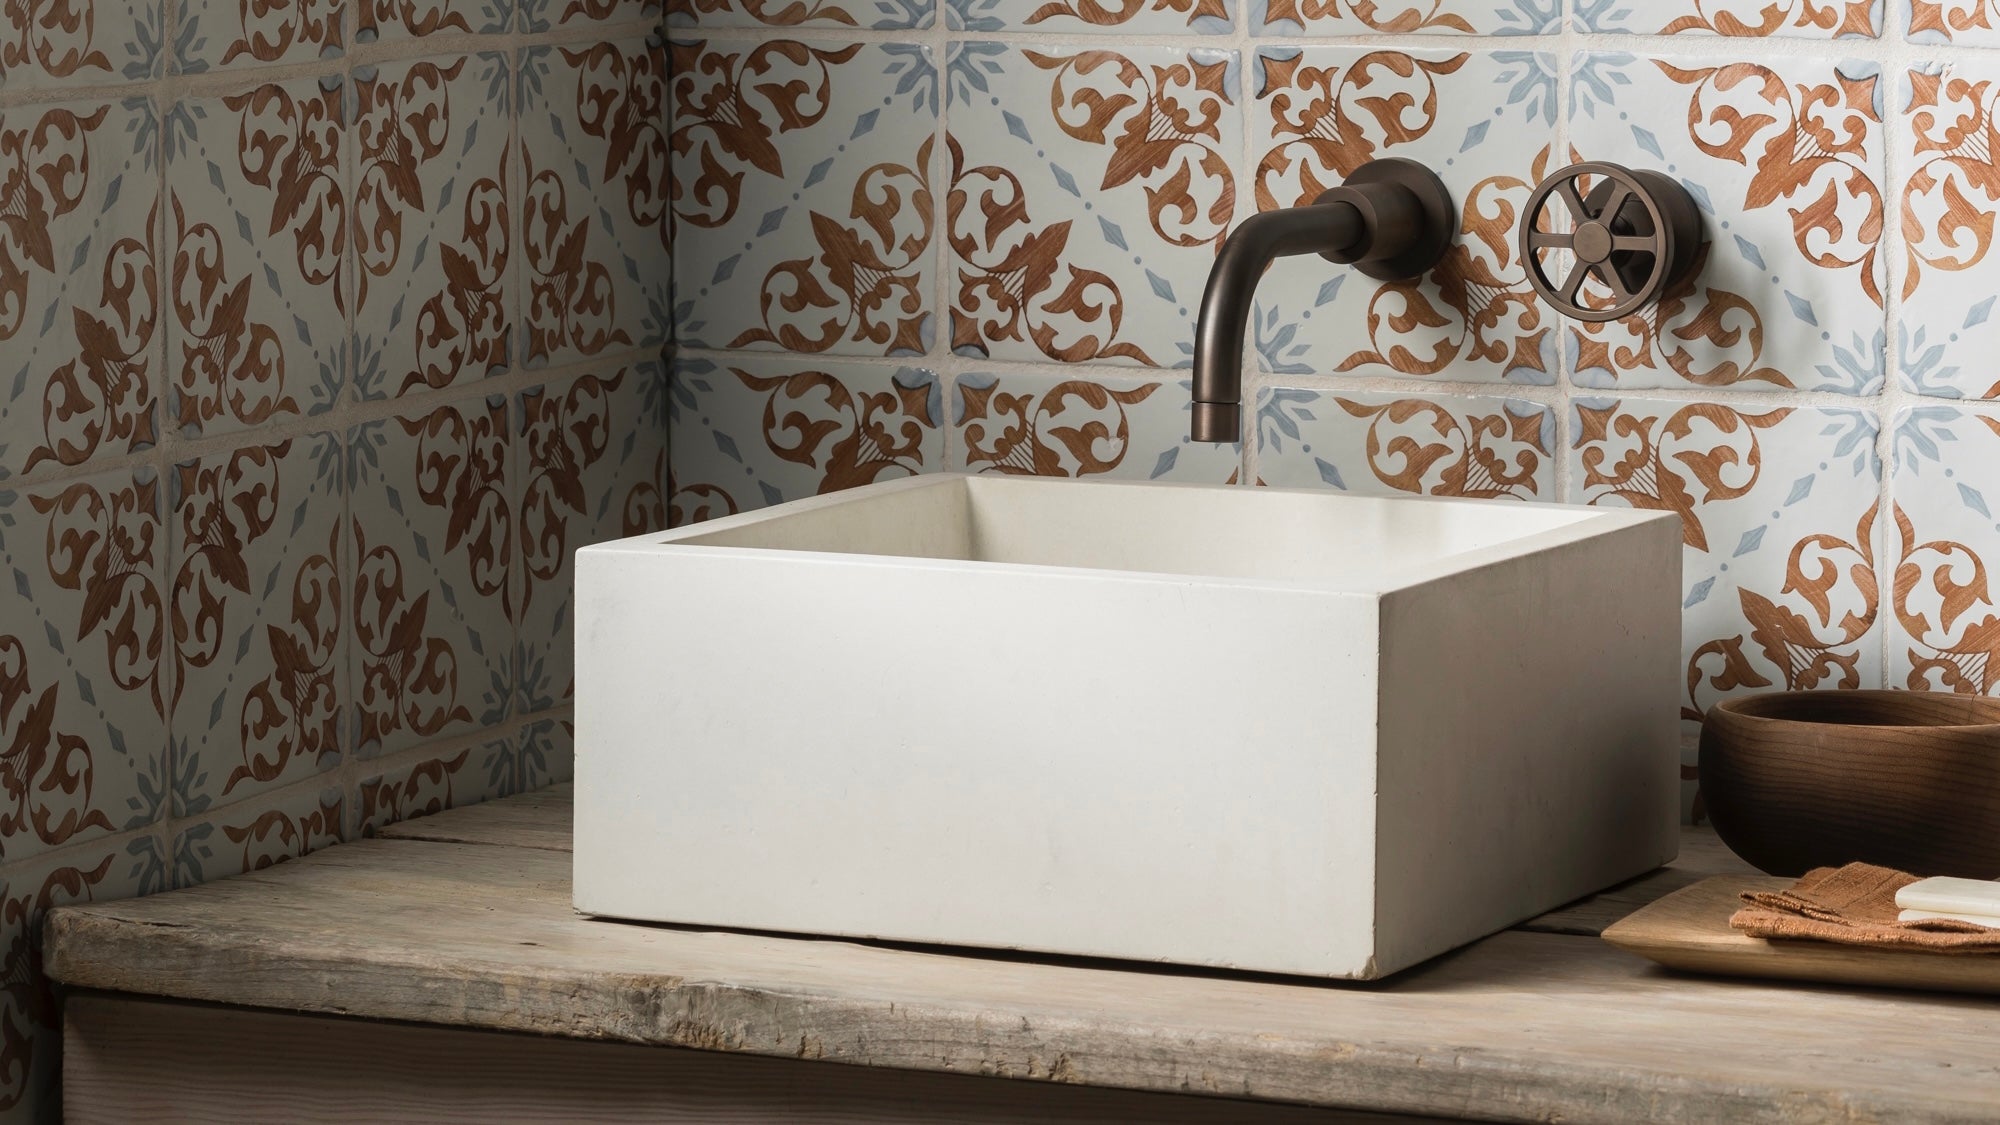 Concrete basin set against some hand painted tiles used as a splash back and brass taps 